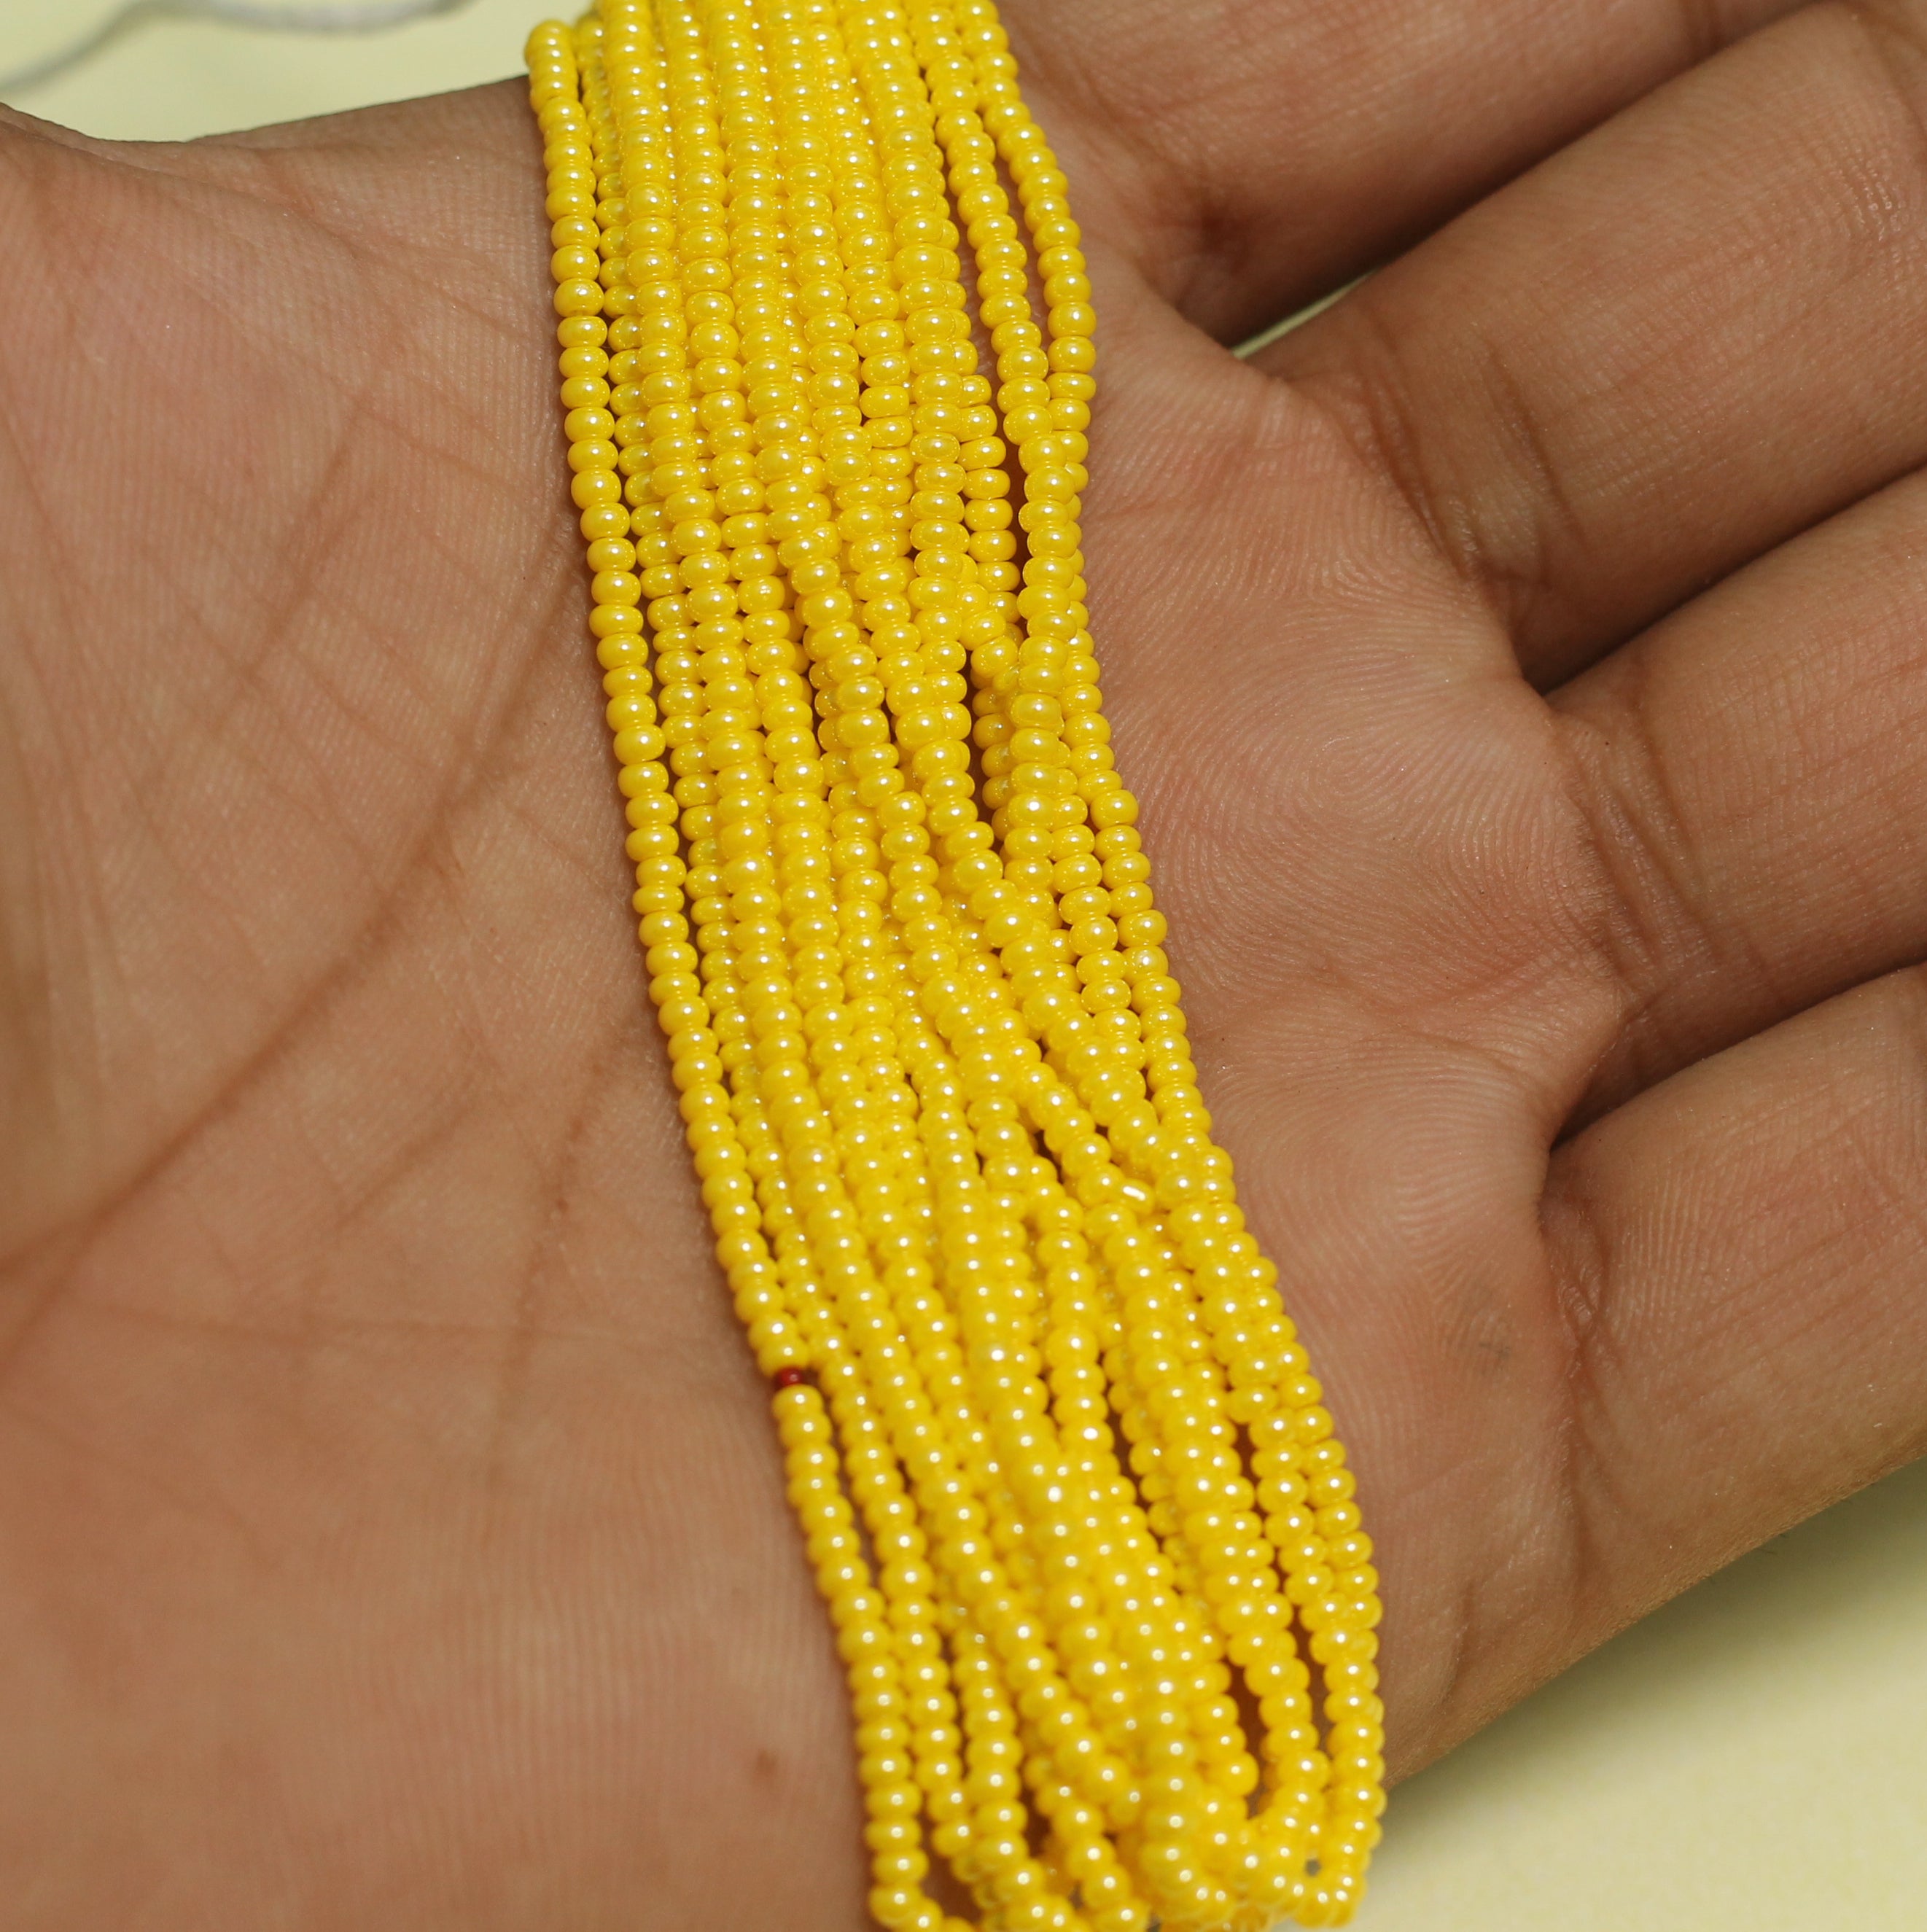 5 Bunch of Preciosa Seed Bead Strings Luster Opaque Yellow